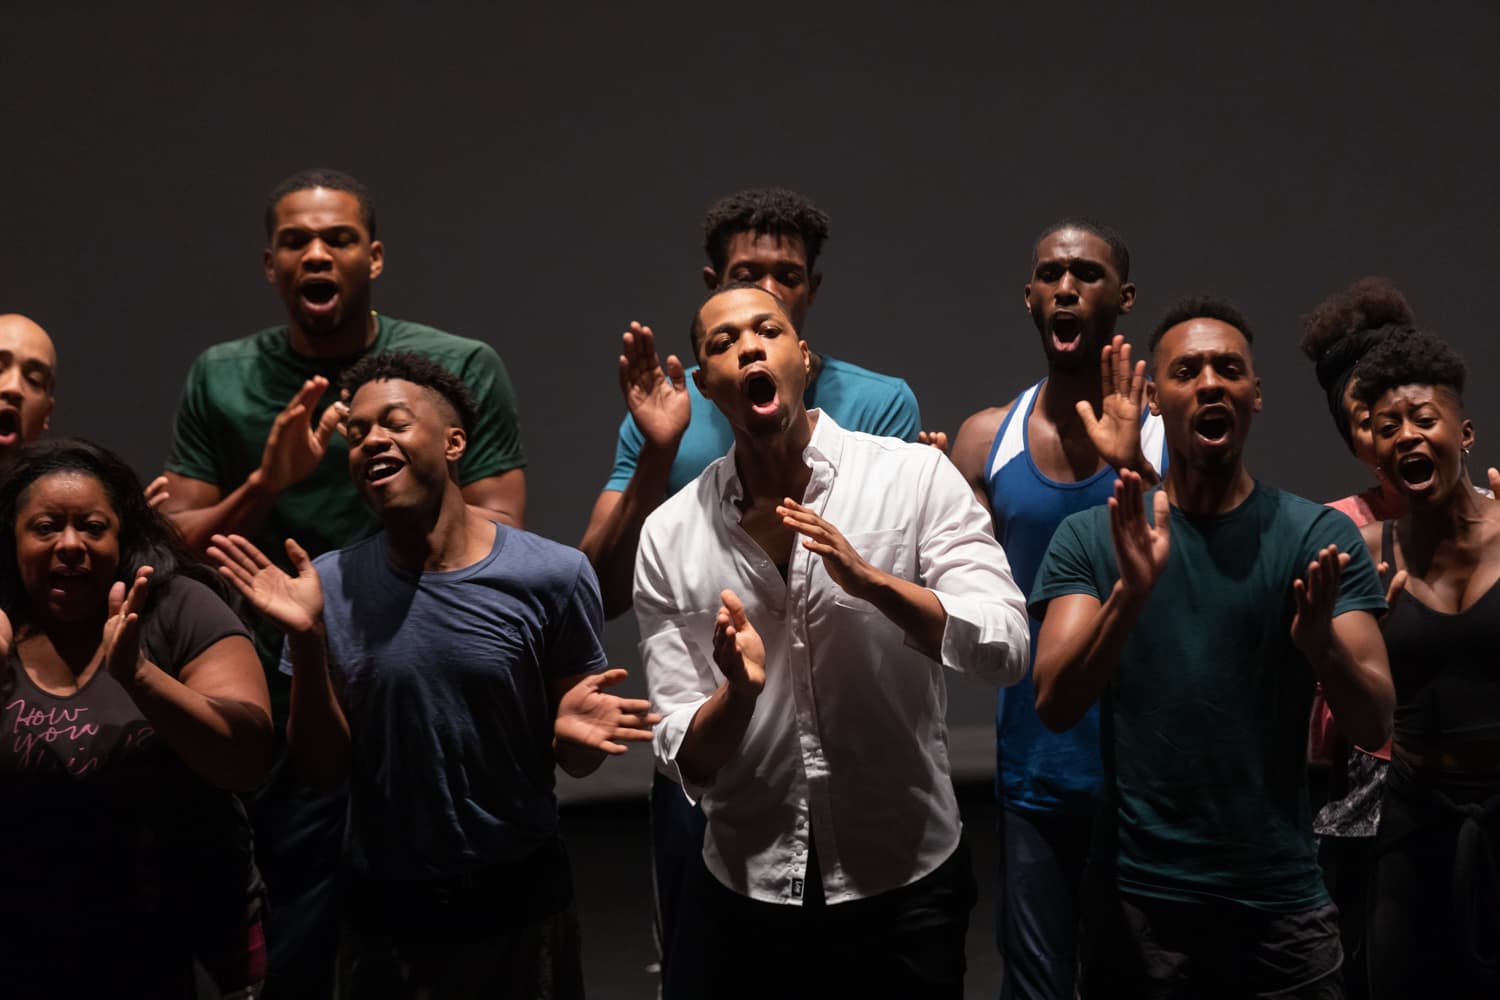 The cast of A.R.T.'s &quot;Black Clown&quot; in rehearsal. (Courtesy Maggie Hall/American Repertory Theater)